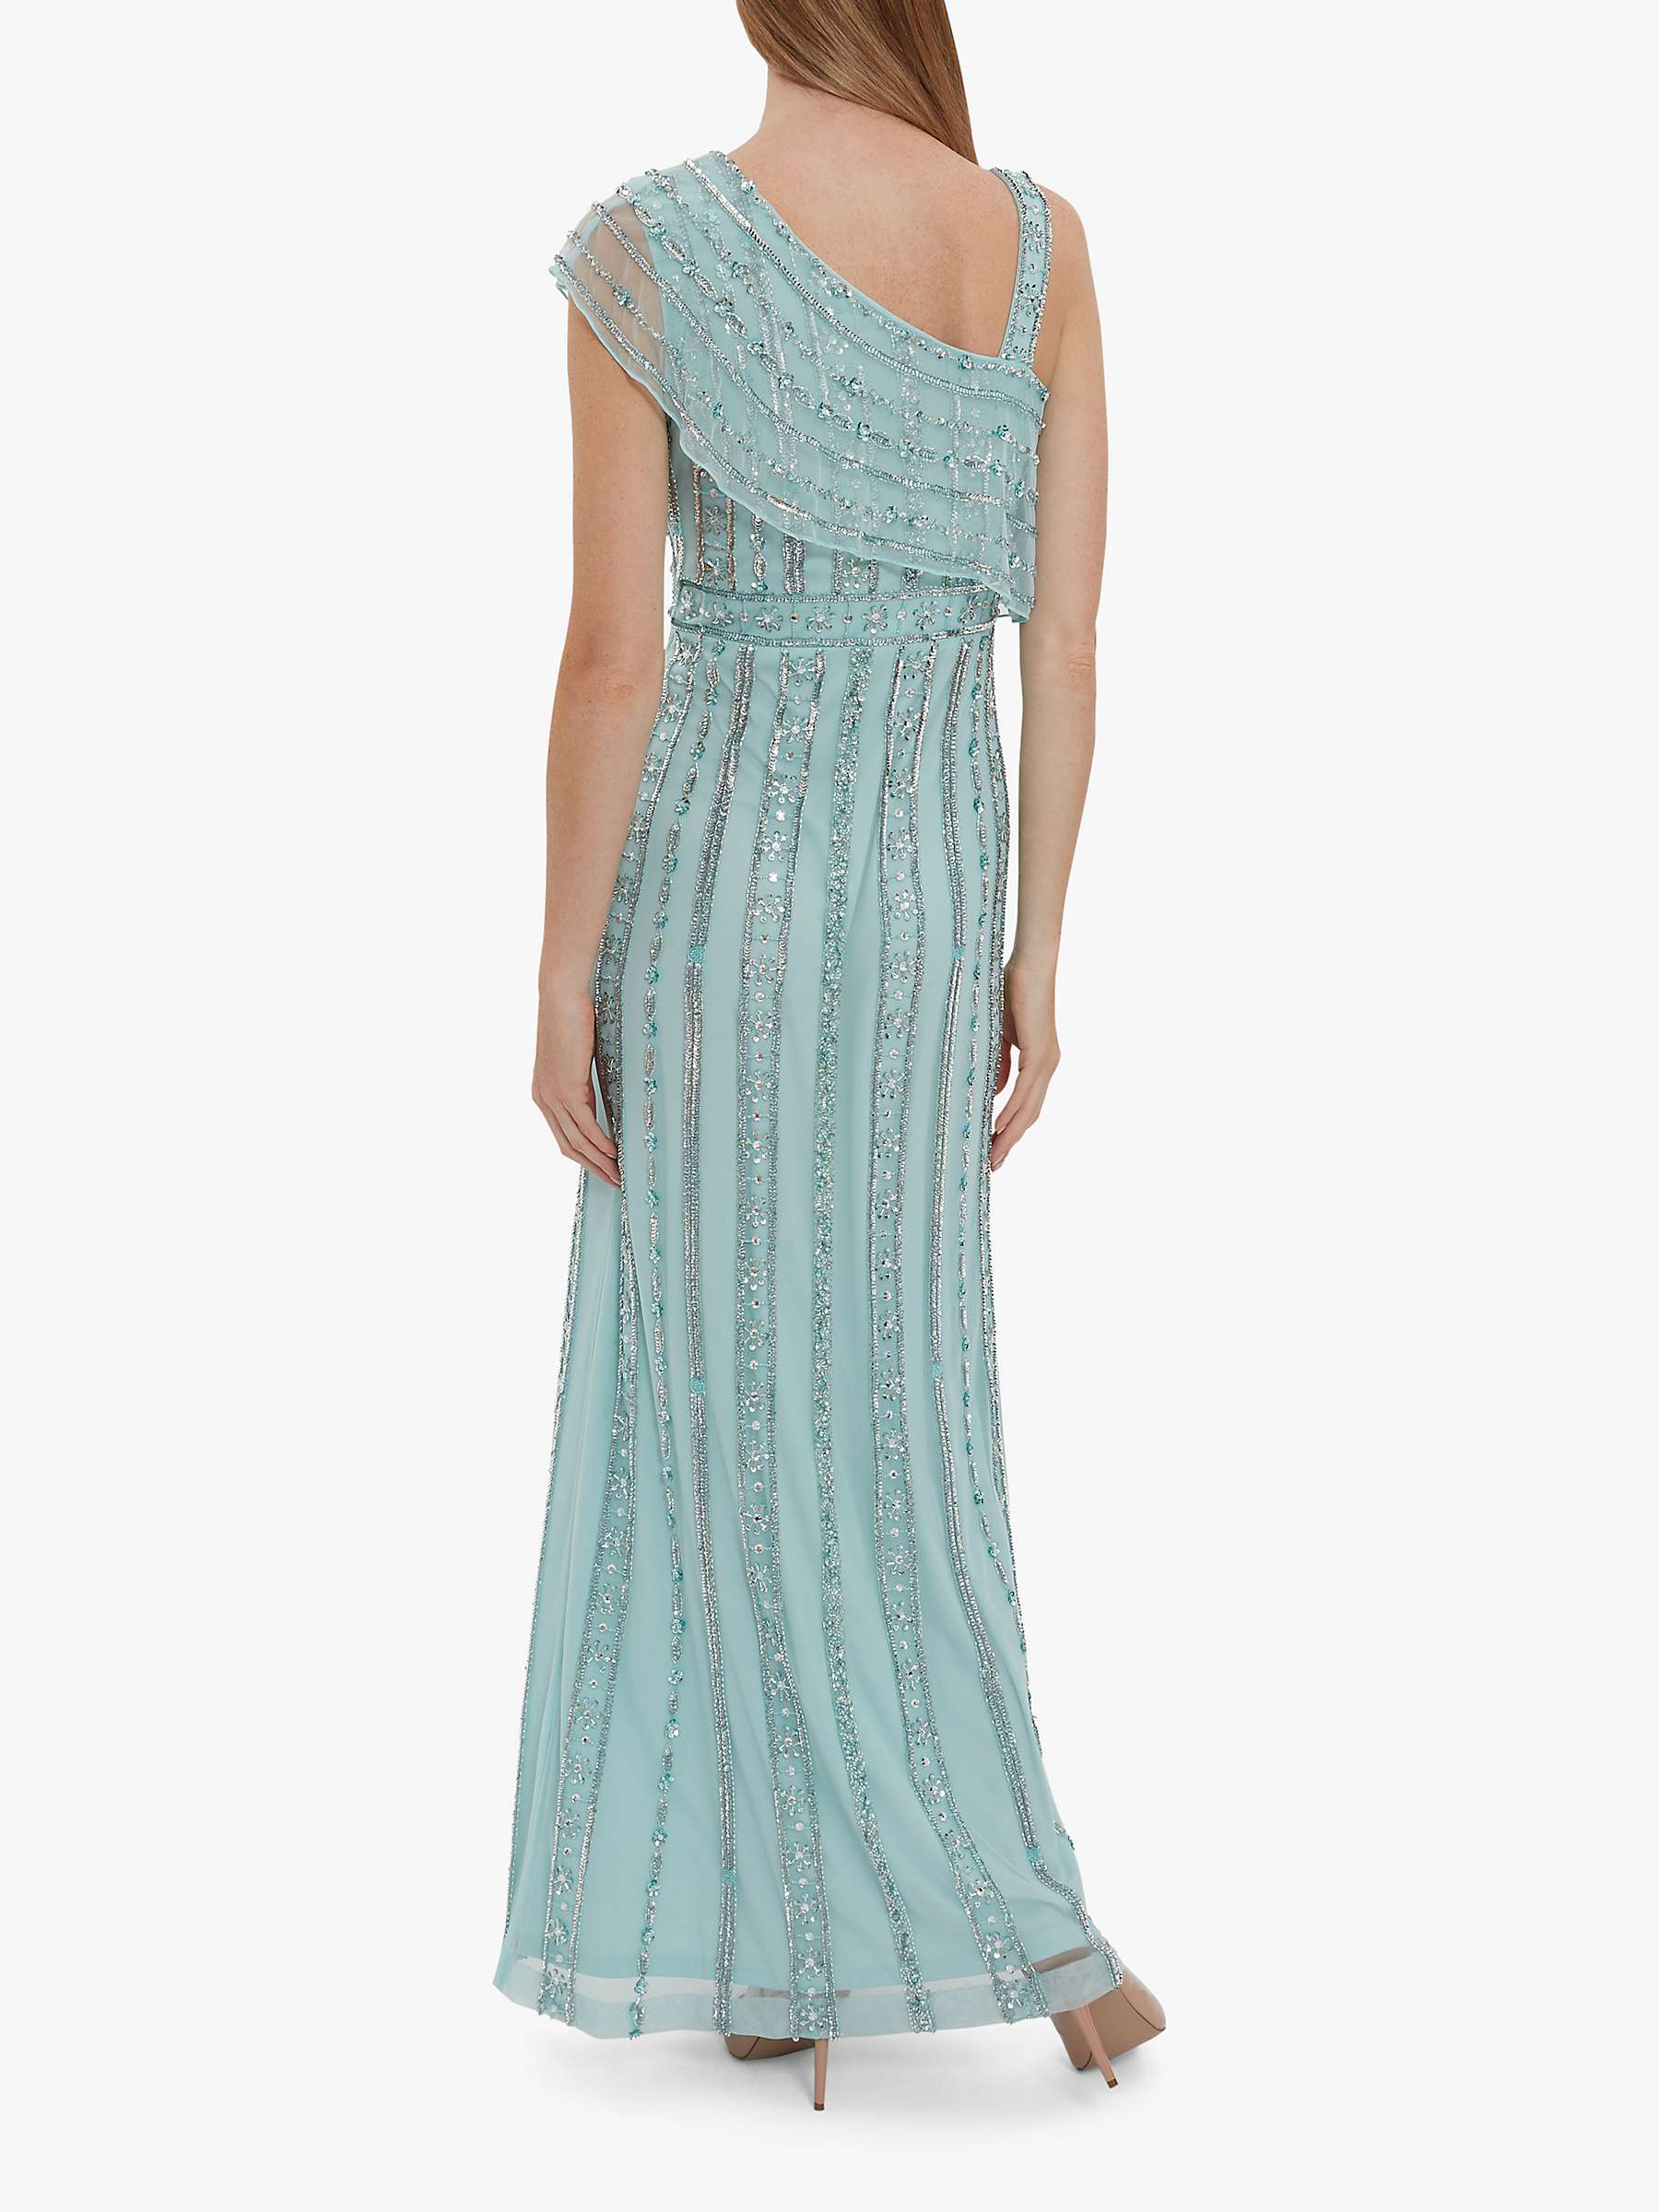 Buy Gina Bacconi Francille Beaded Dress Online at johnlewis.com